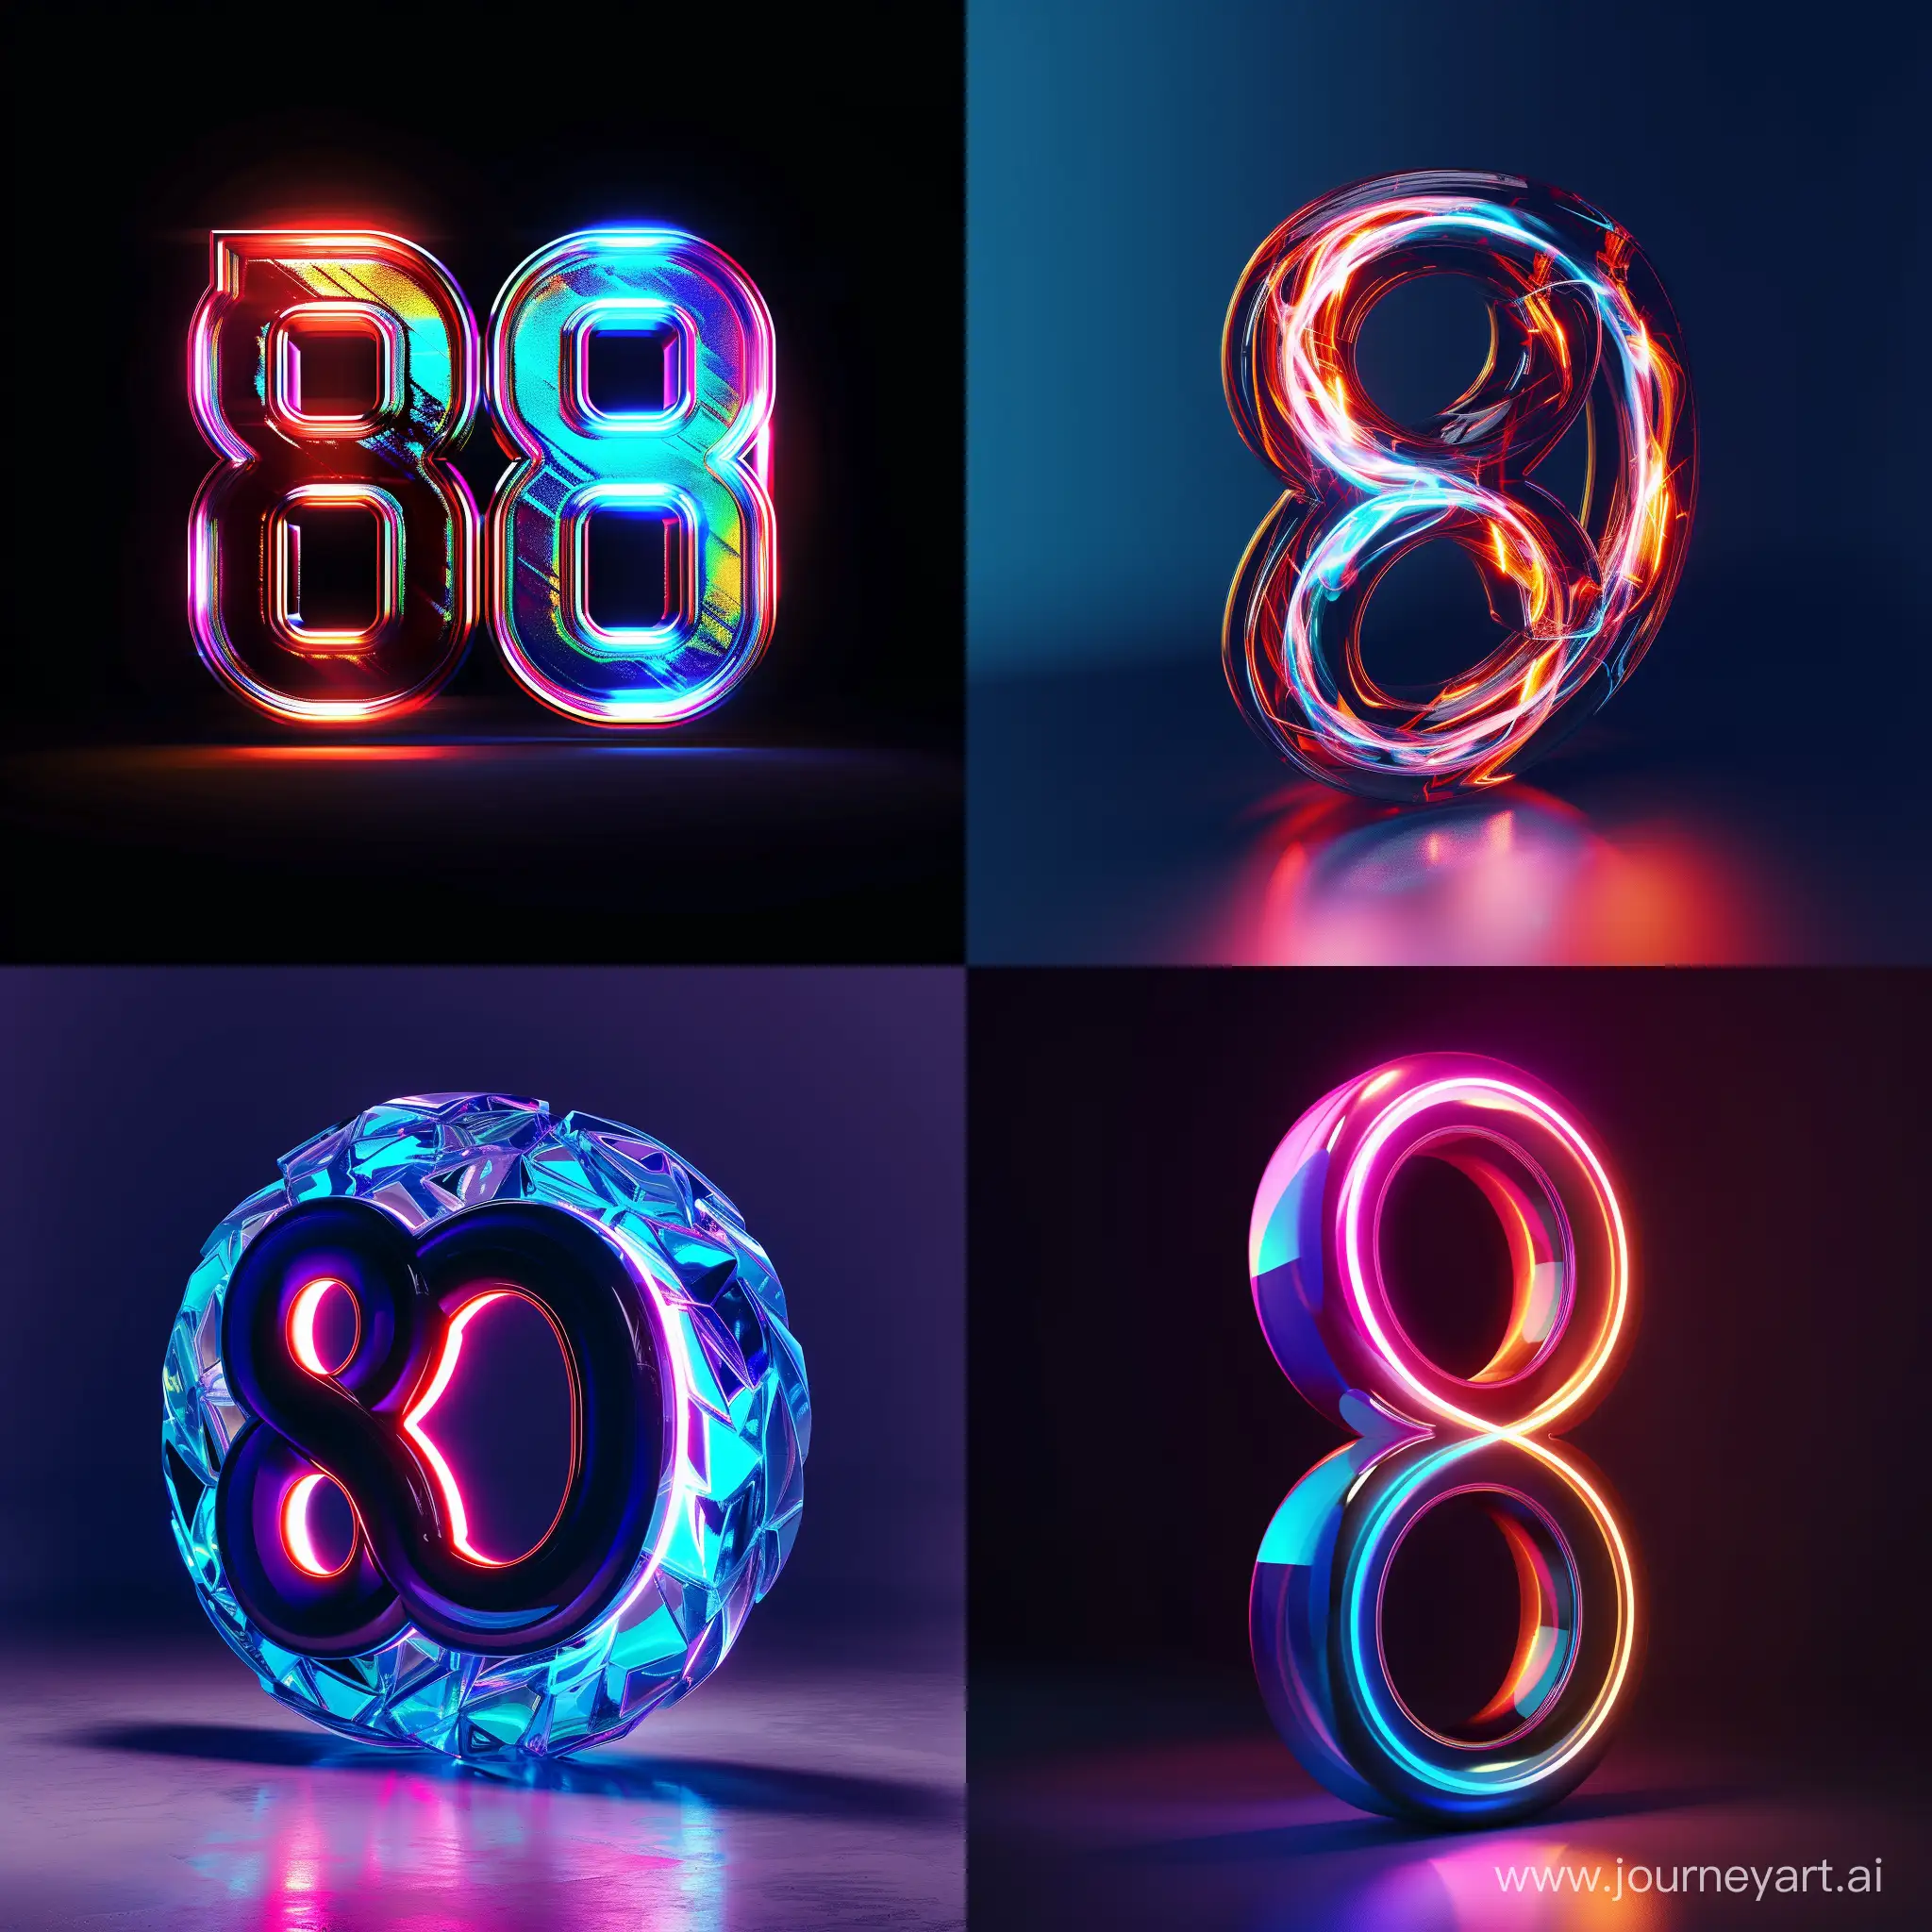 Programming languages implementation and design LOGO, 8k, realistic, holographic